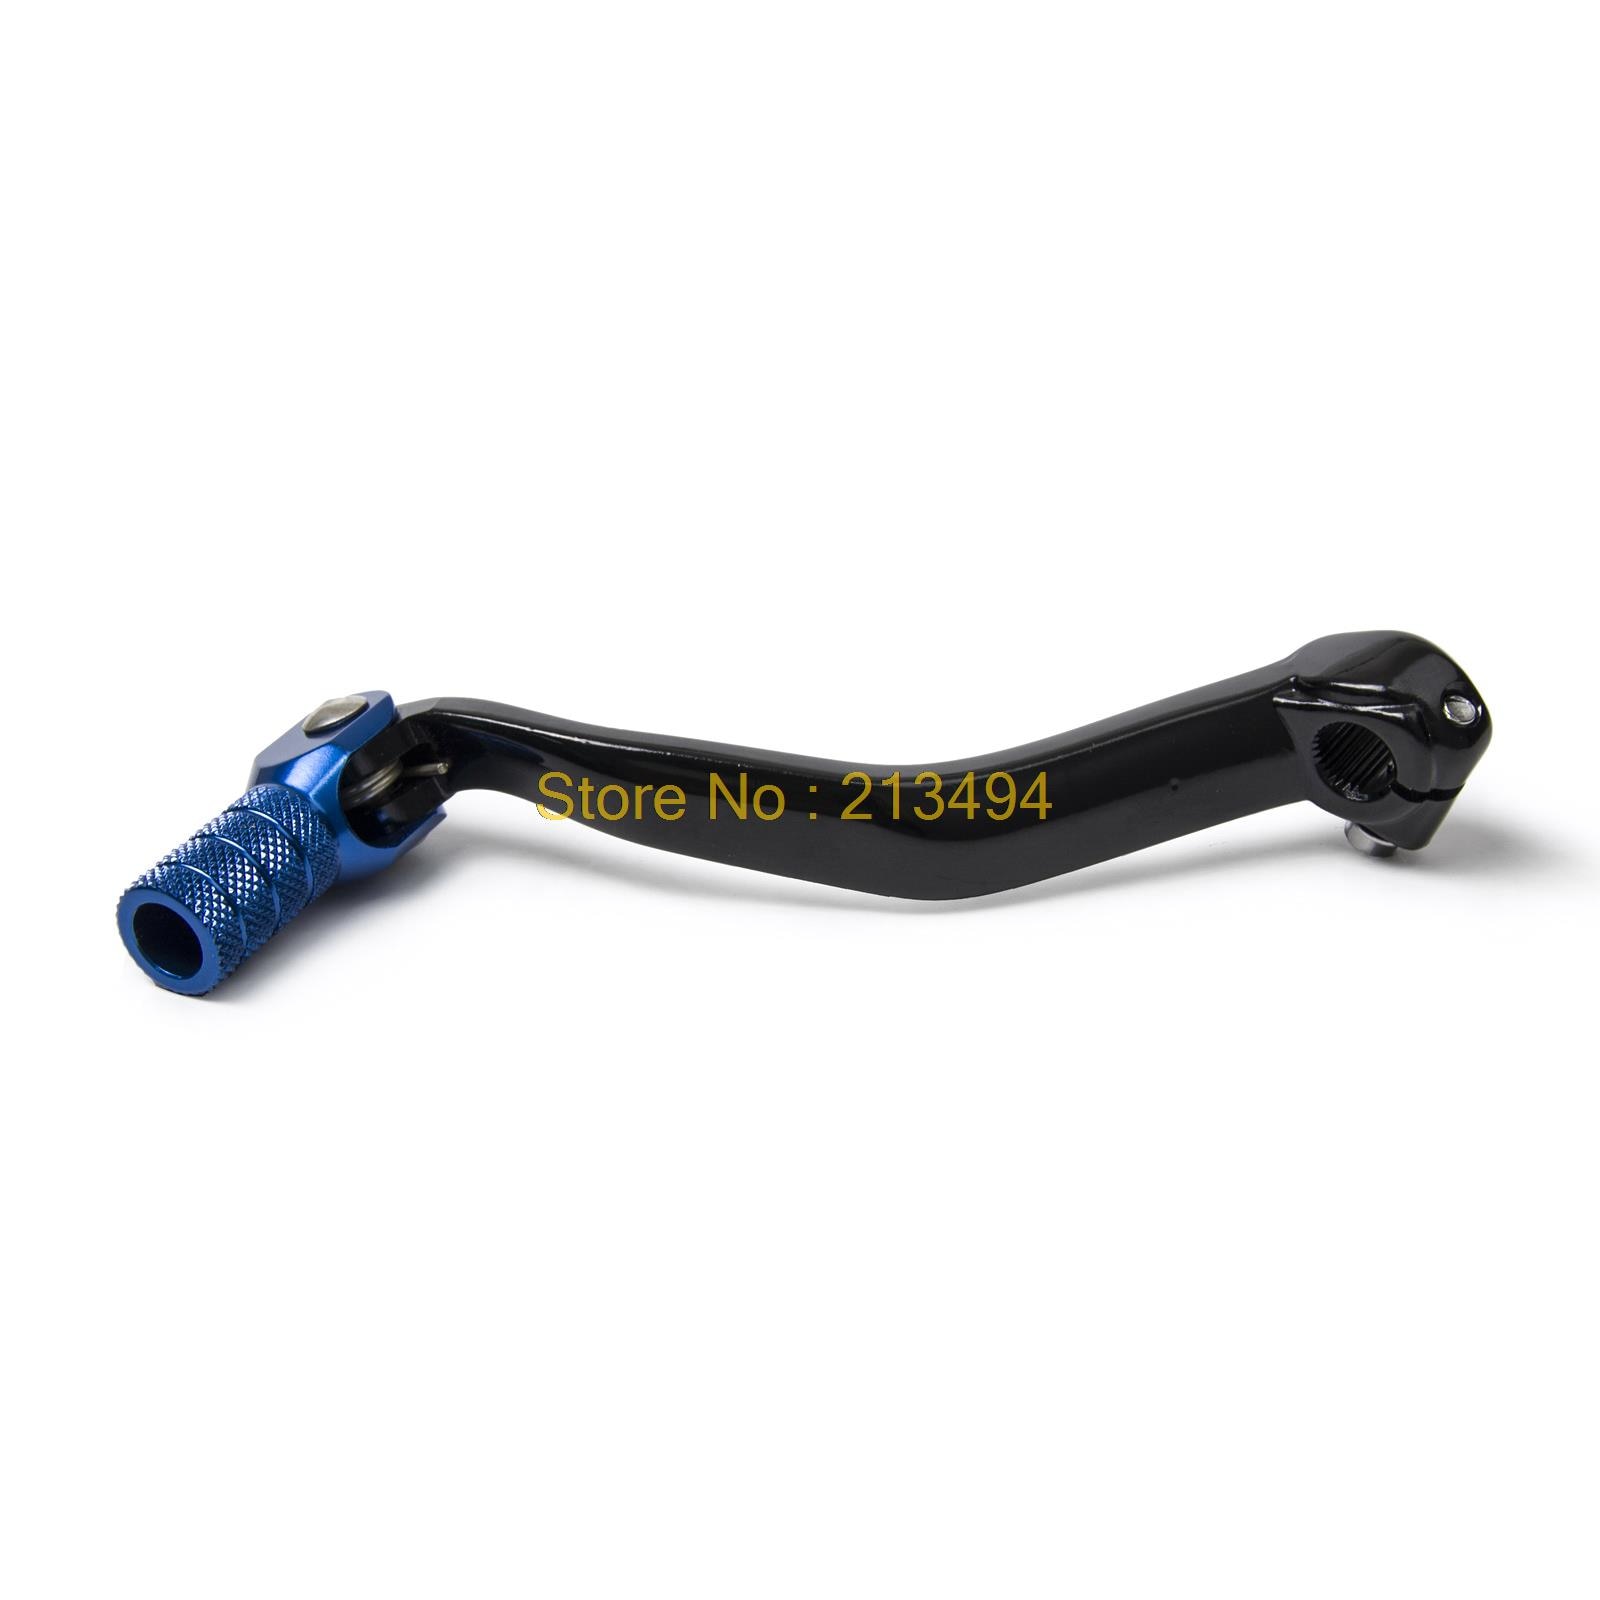 Blauw Tip CNC Gear Pedaal Versnellingspook Voor Voor Yamaha YZ250F YZ450F YZ450FX WR450F